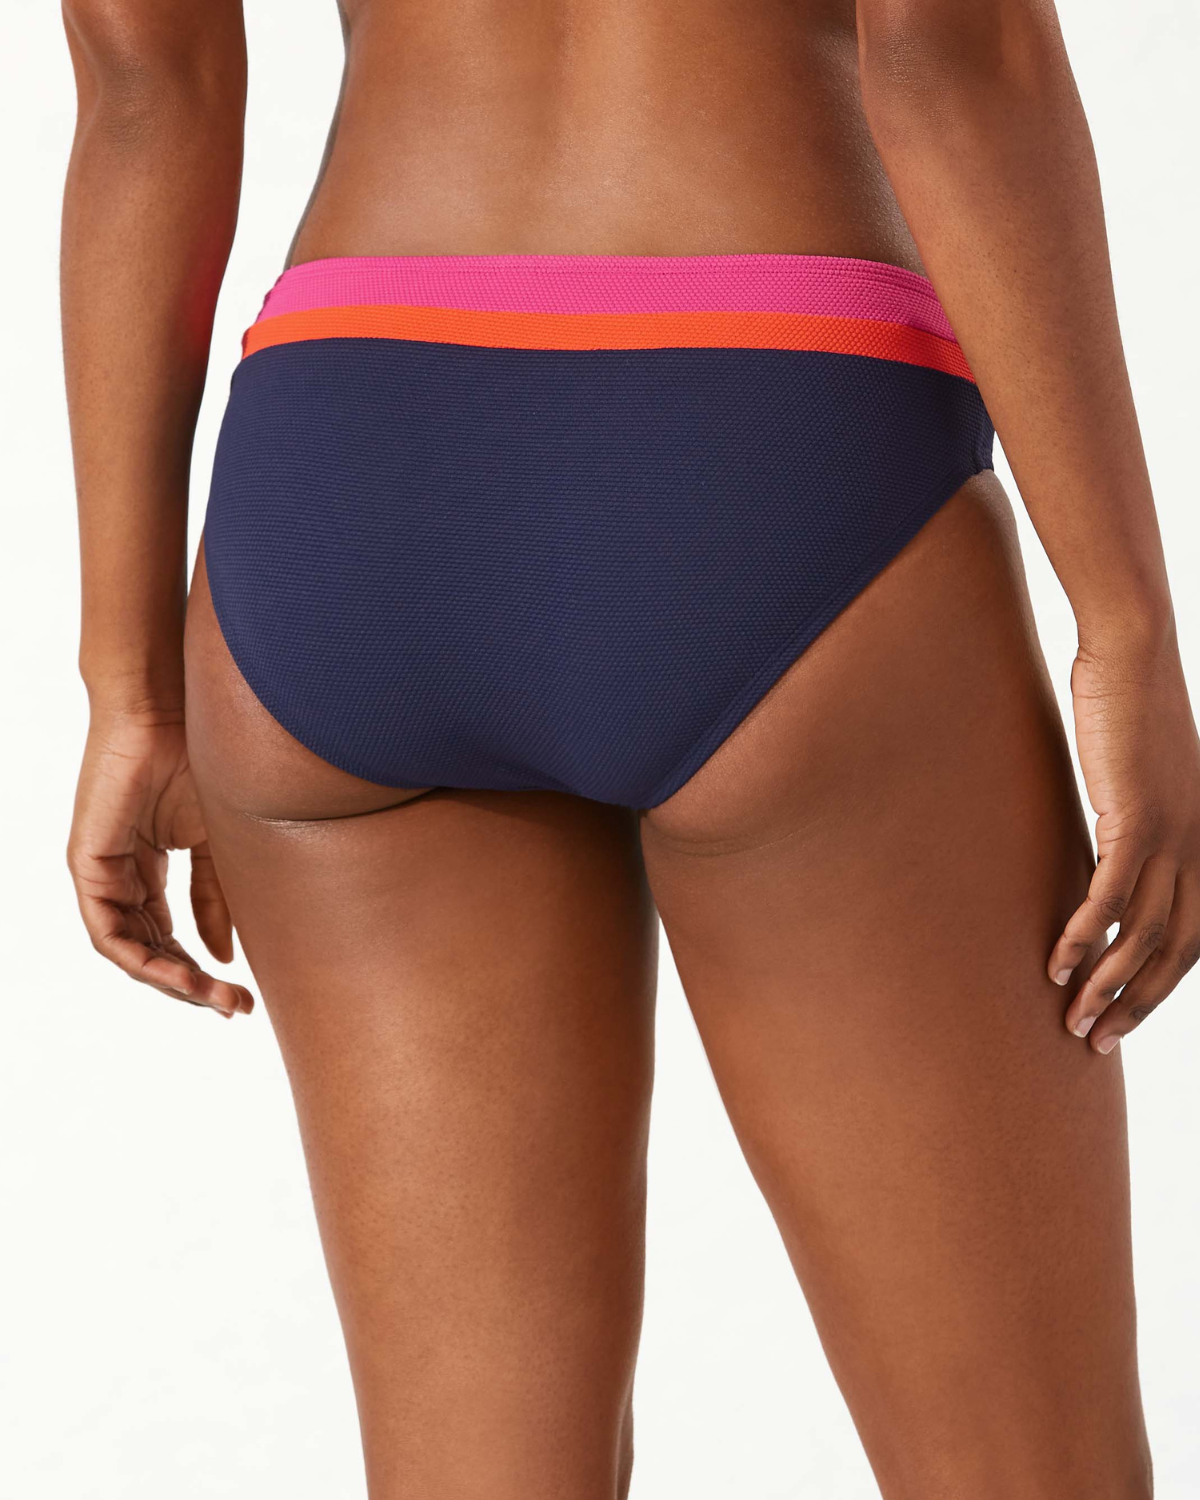 Model wearing a hipster bikini bottom in navy with a pink and orange stripe at the top